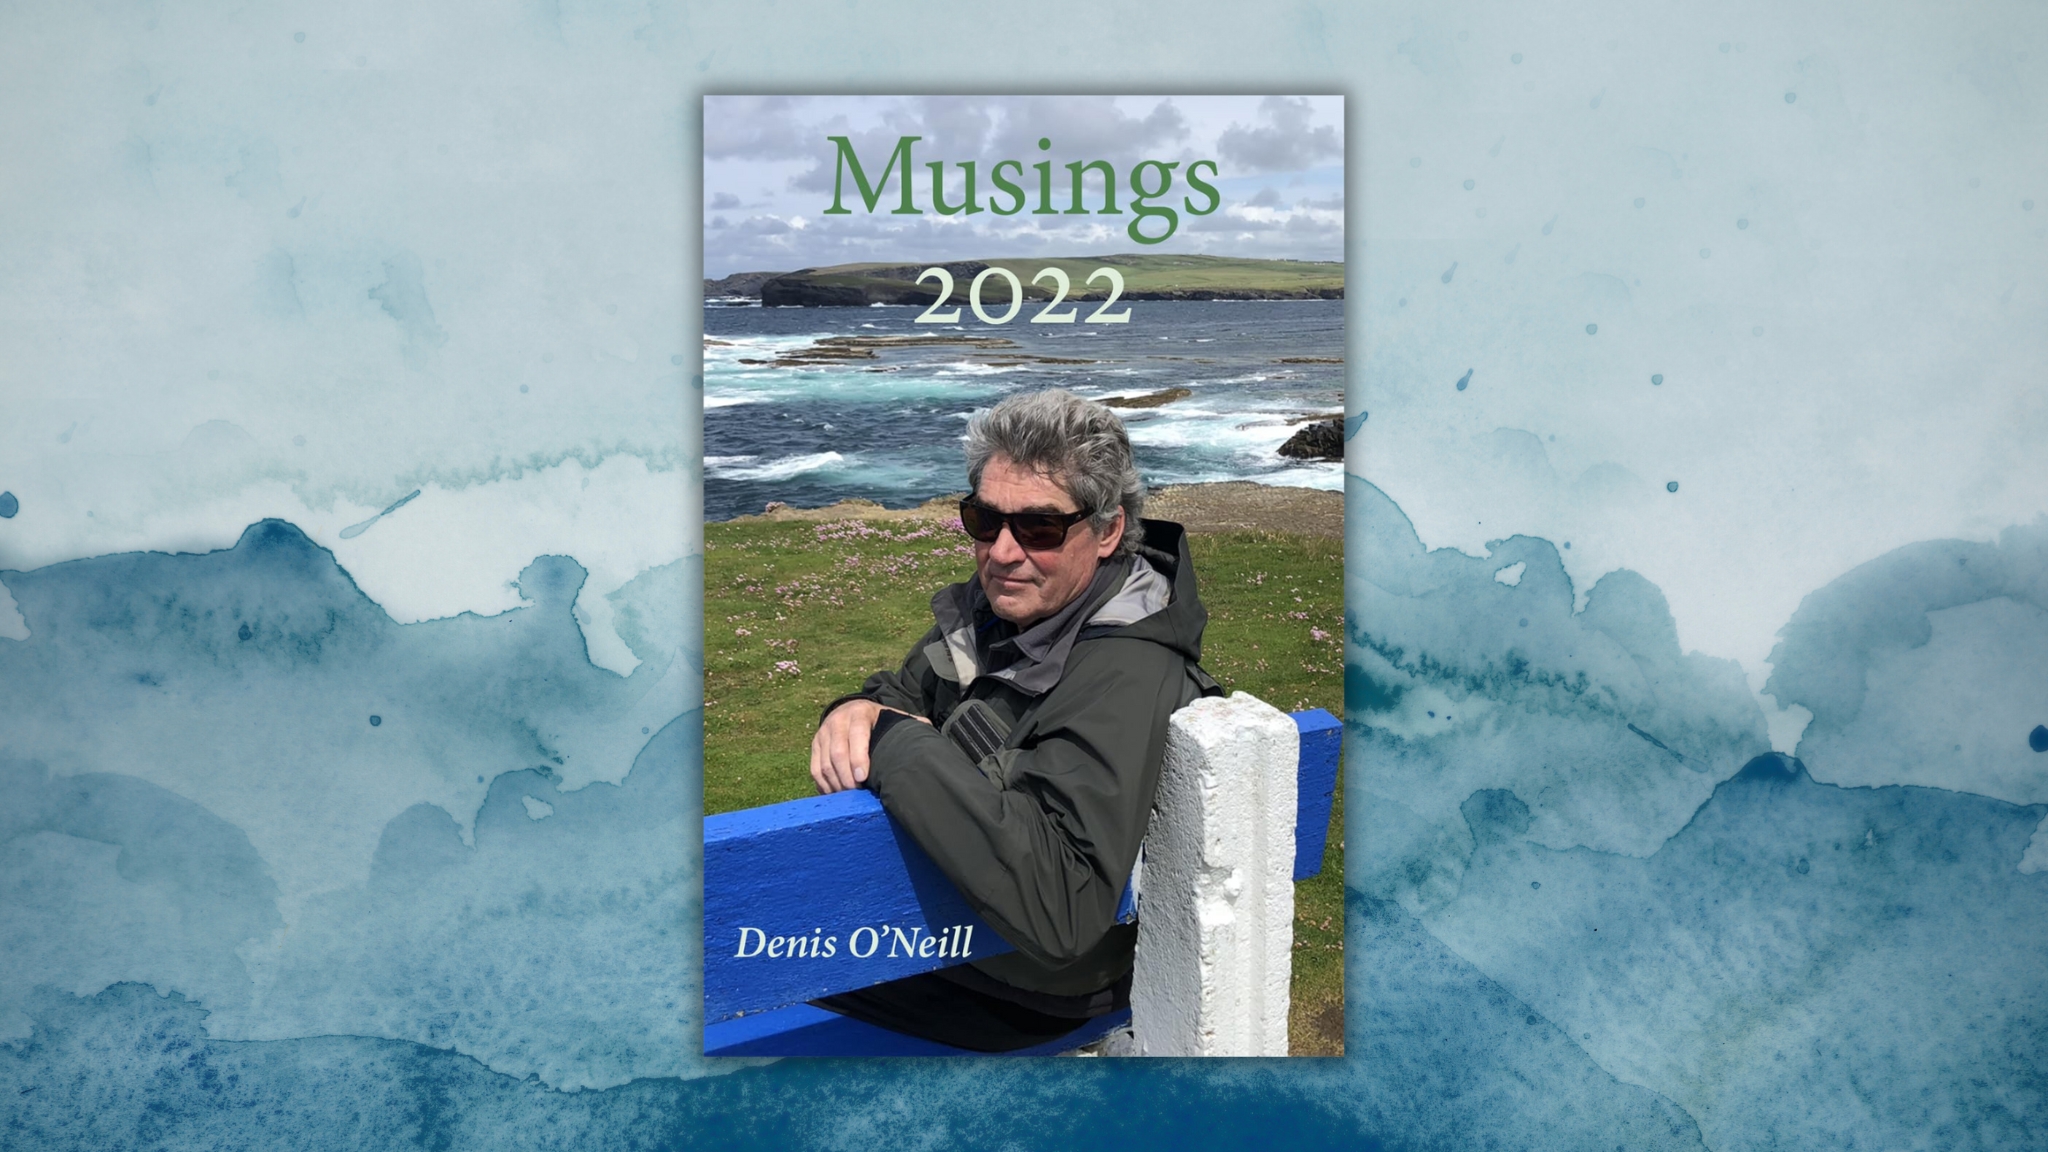 Musings 2022 by Denis ONeill